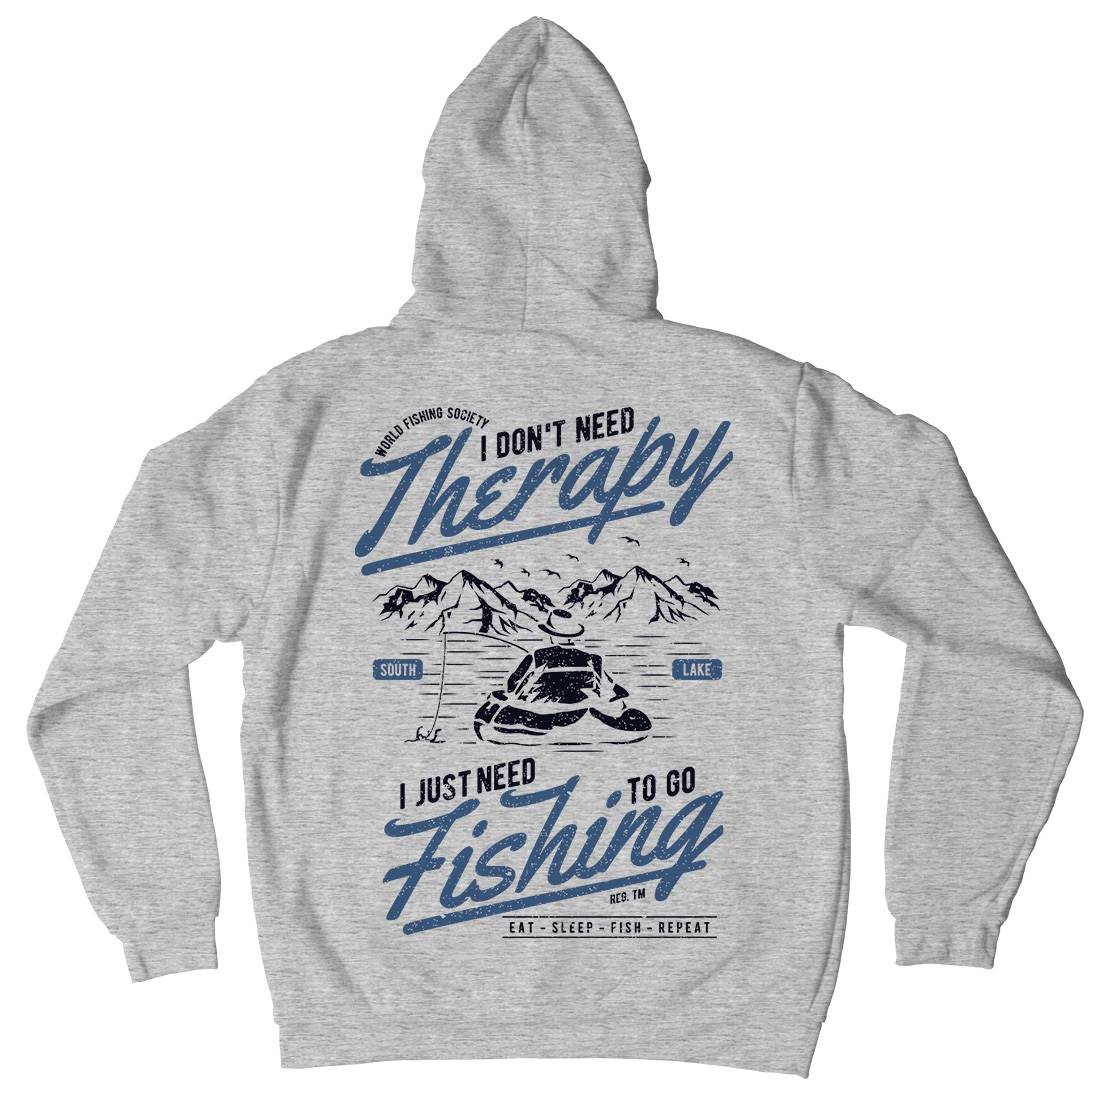 Therapy Kids Crew Neck Hoodie Fishing A662